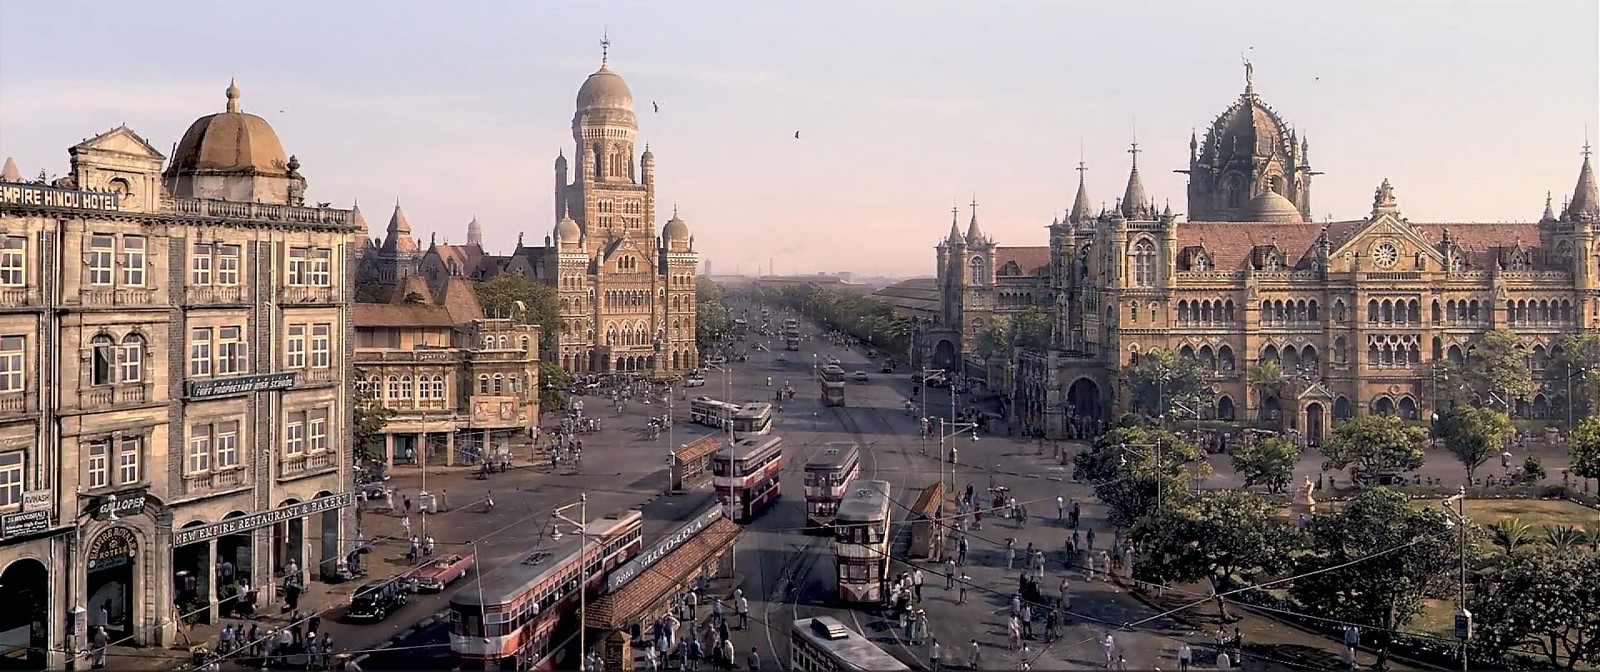 An architectural review of Bombay Velvet - Sheet7